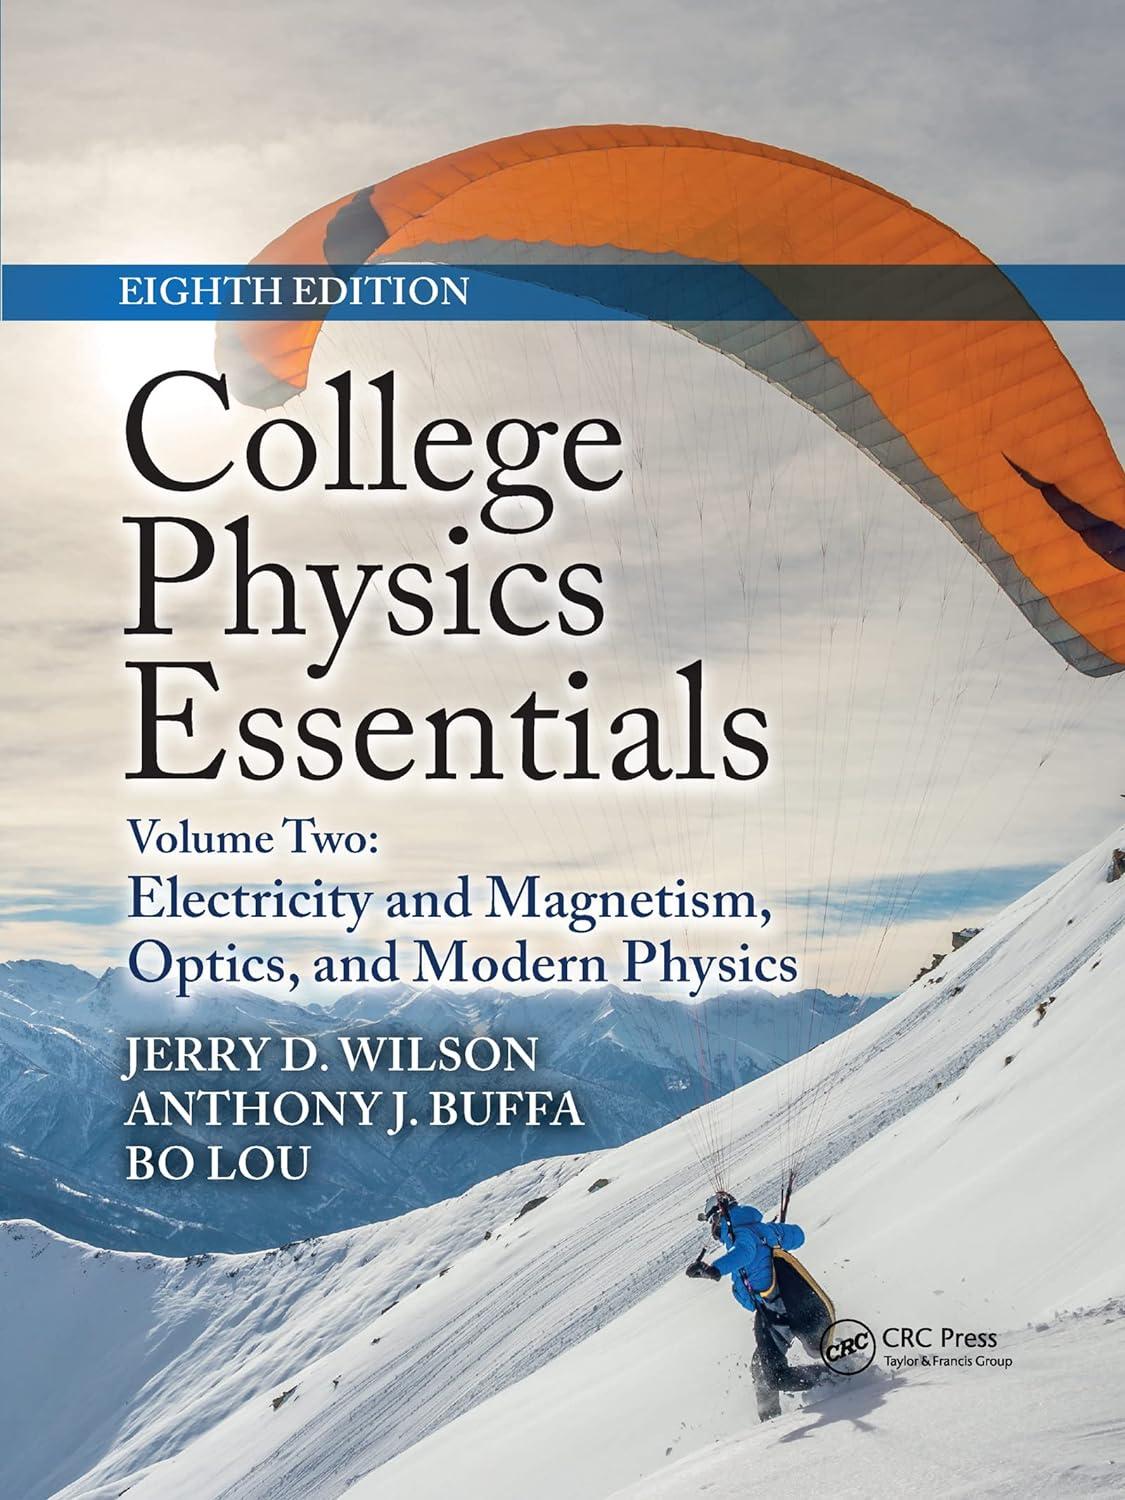 college physics essentials electricity and magnetism optics modern physics volume two 8th edition jerry d.